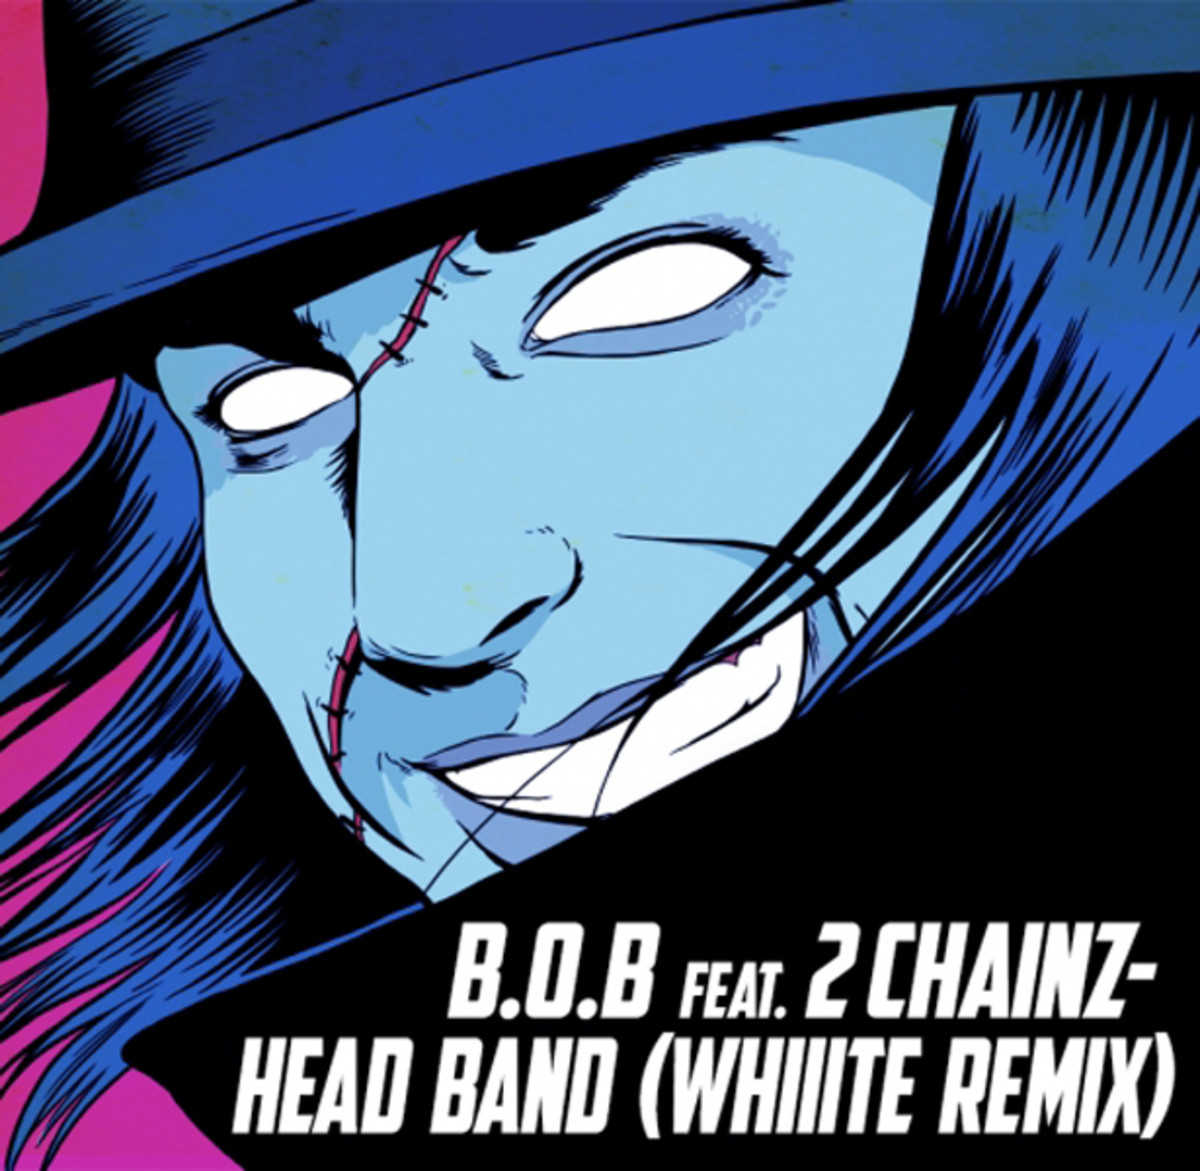 EDM Download: Whiiite's Trap Remix of B.o.B.'s "Headband" Featuring 2 Chainz